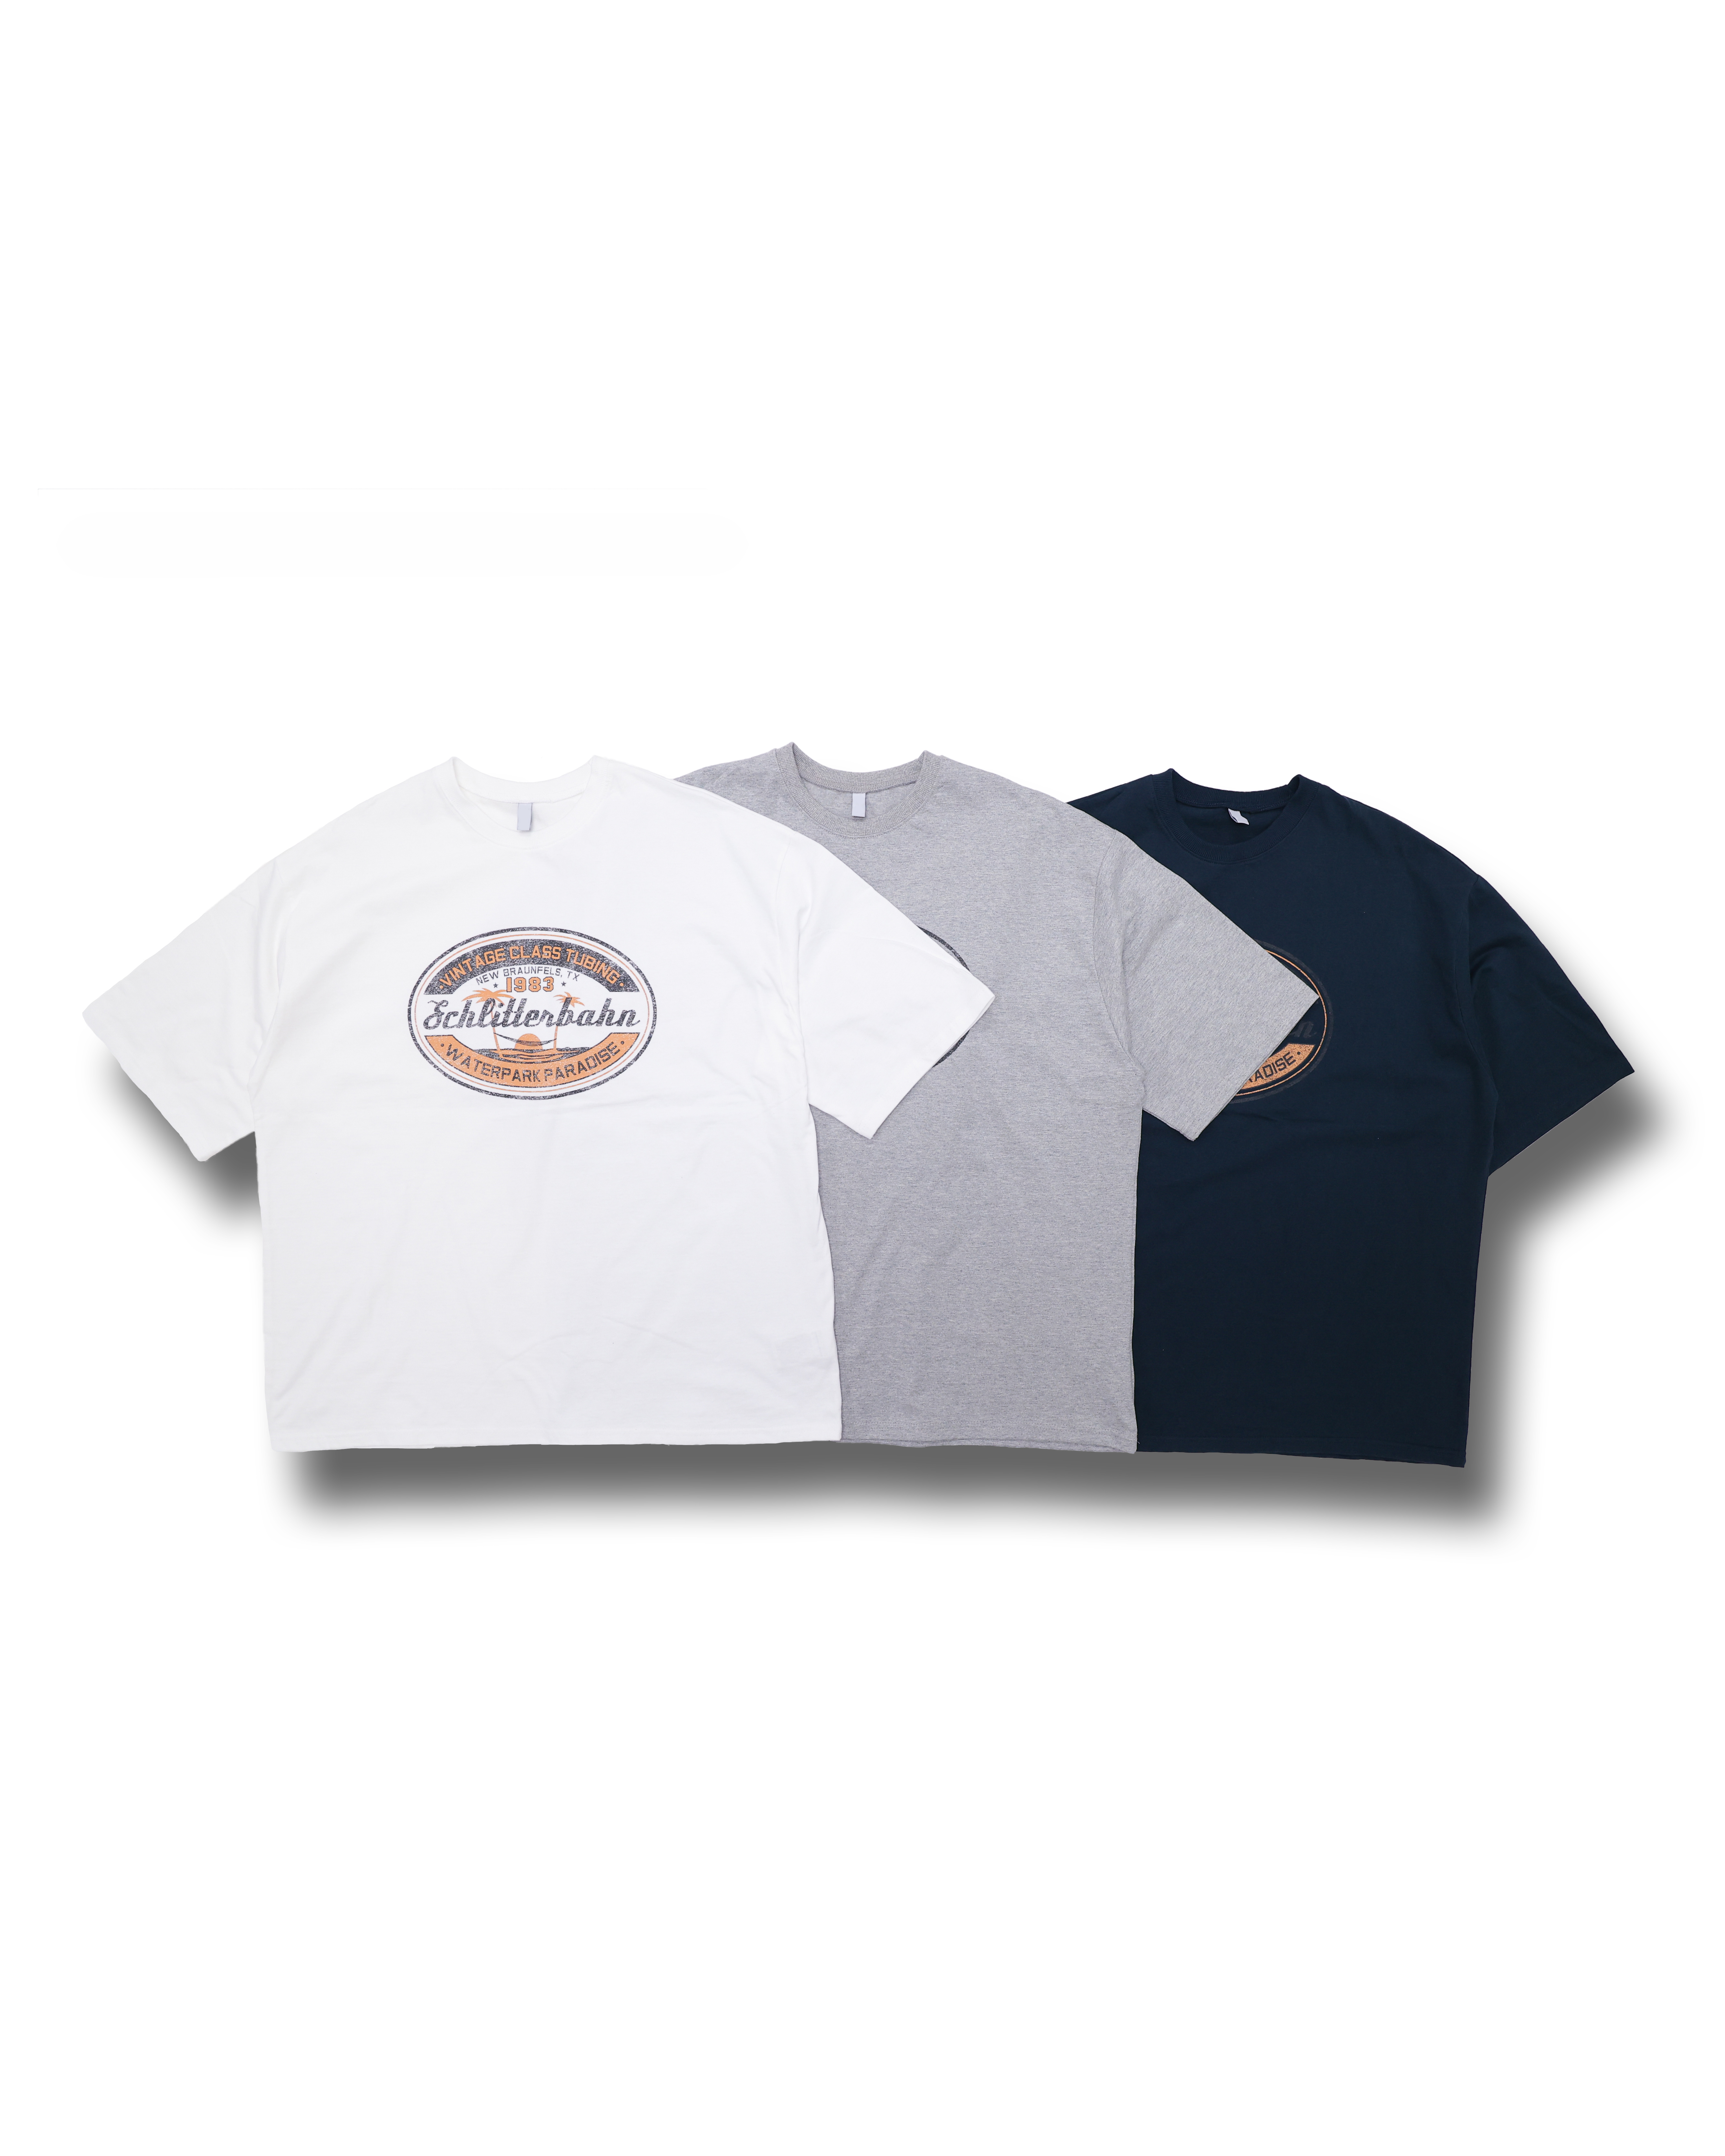 Classic Vintage Printed T Shirts (Navy/Gray/Ivory)